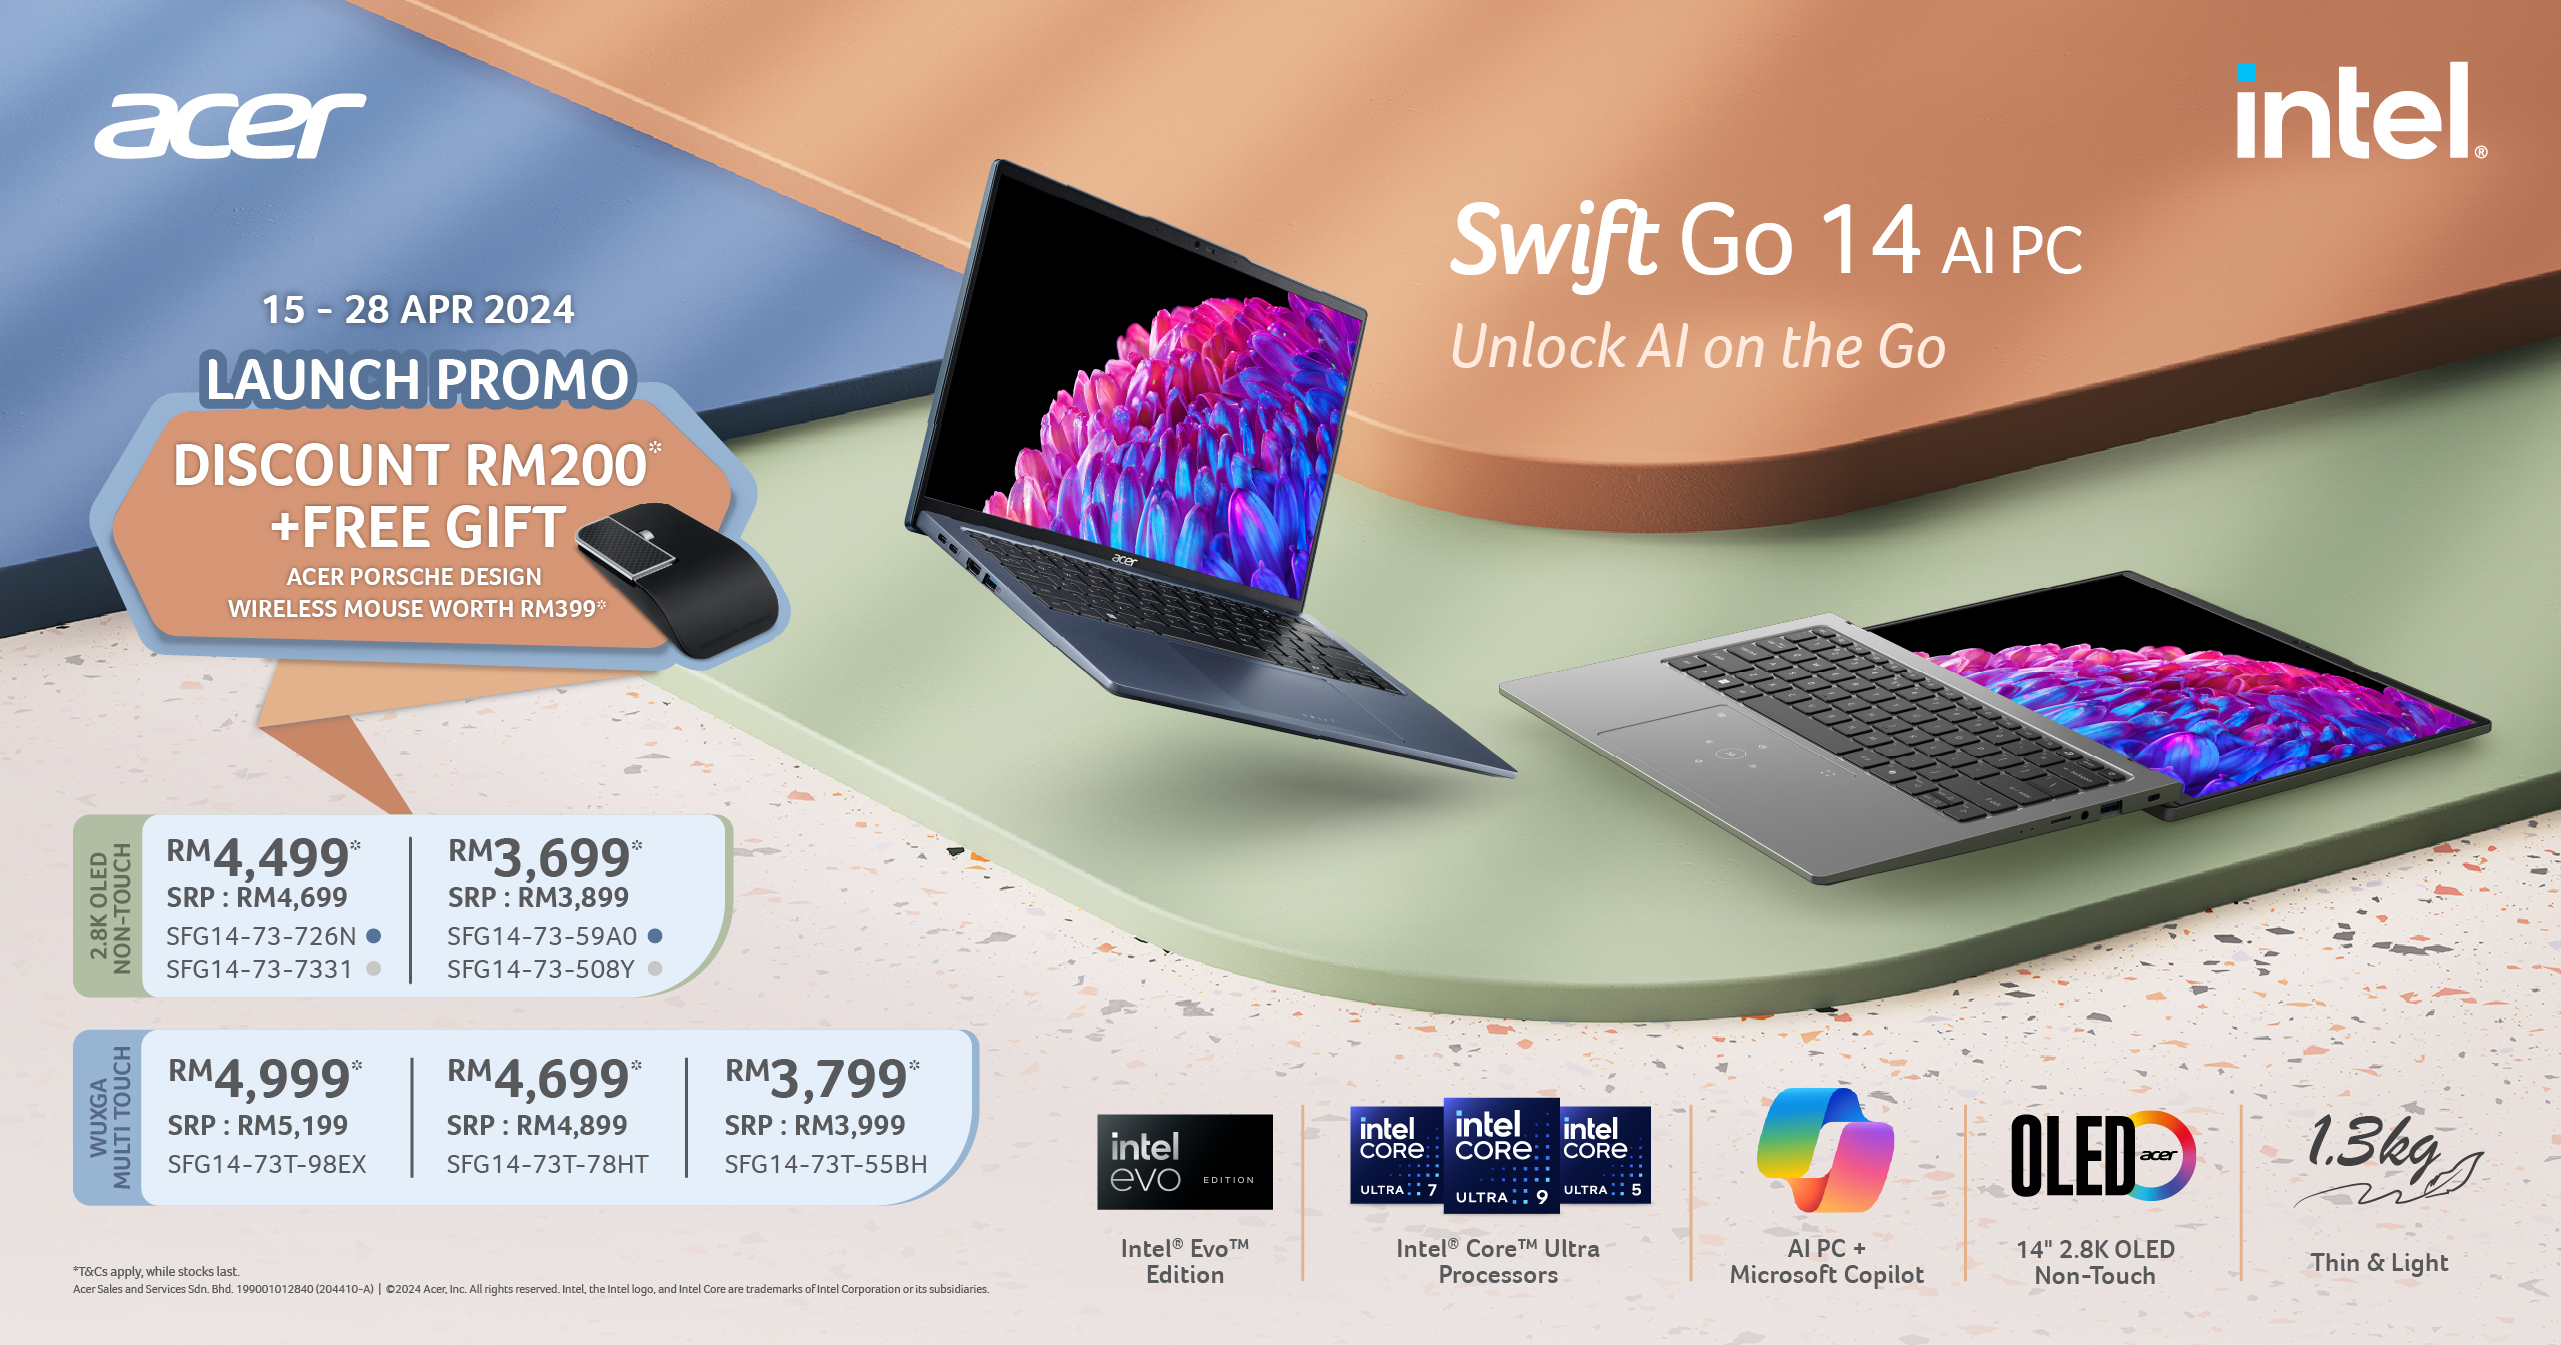 Acer Swift Go 14 refreshed with OLED screens and Intel Core Ultra, starting at RM3,899